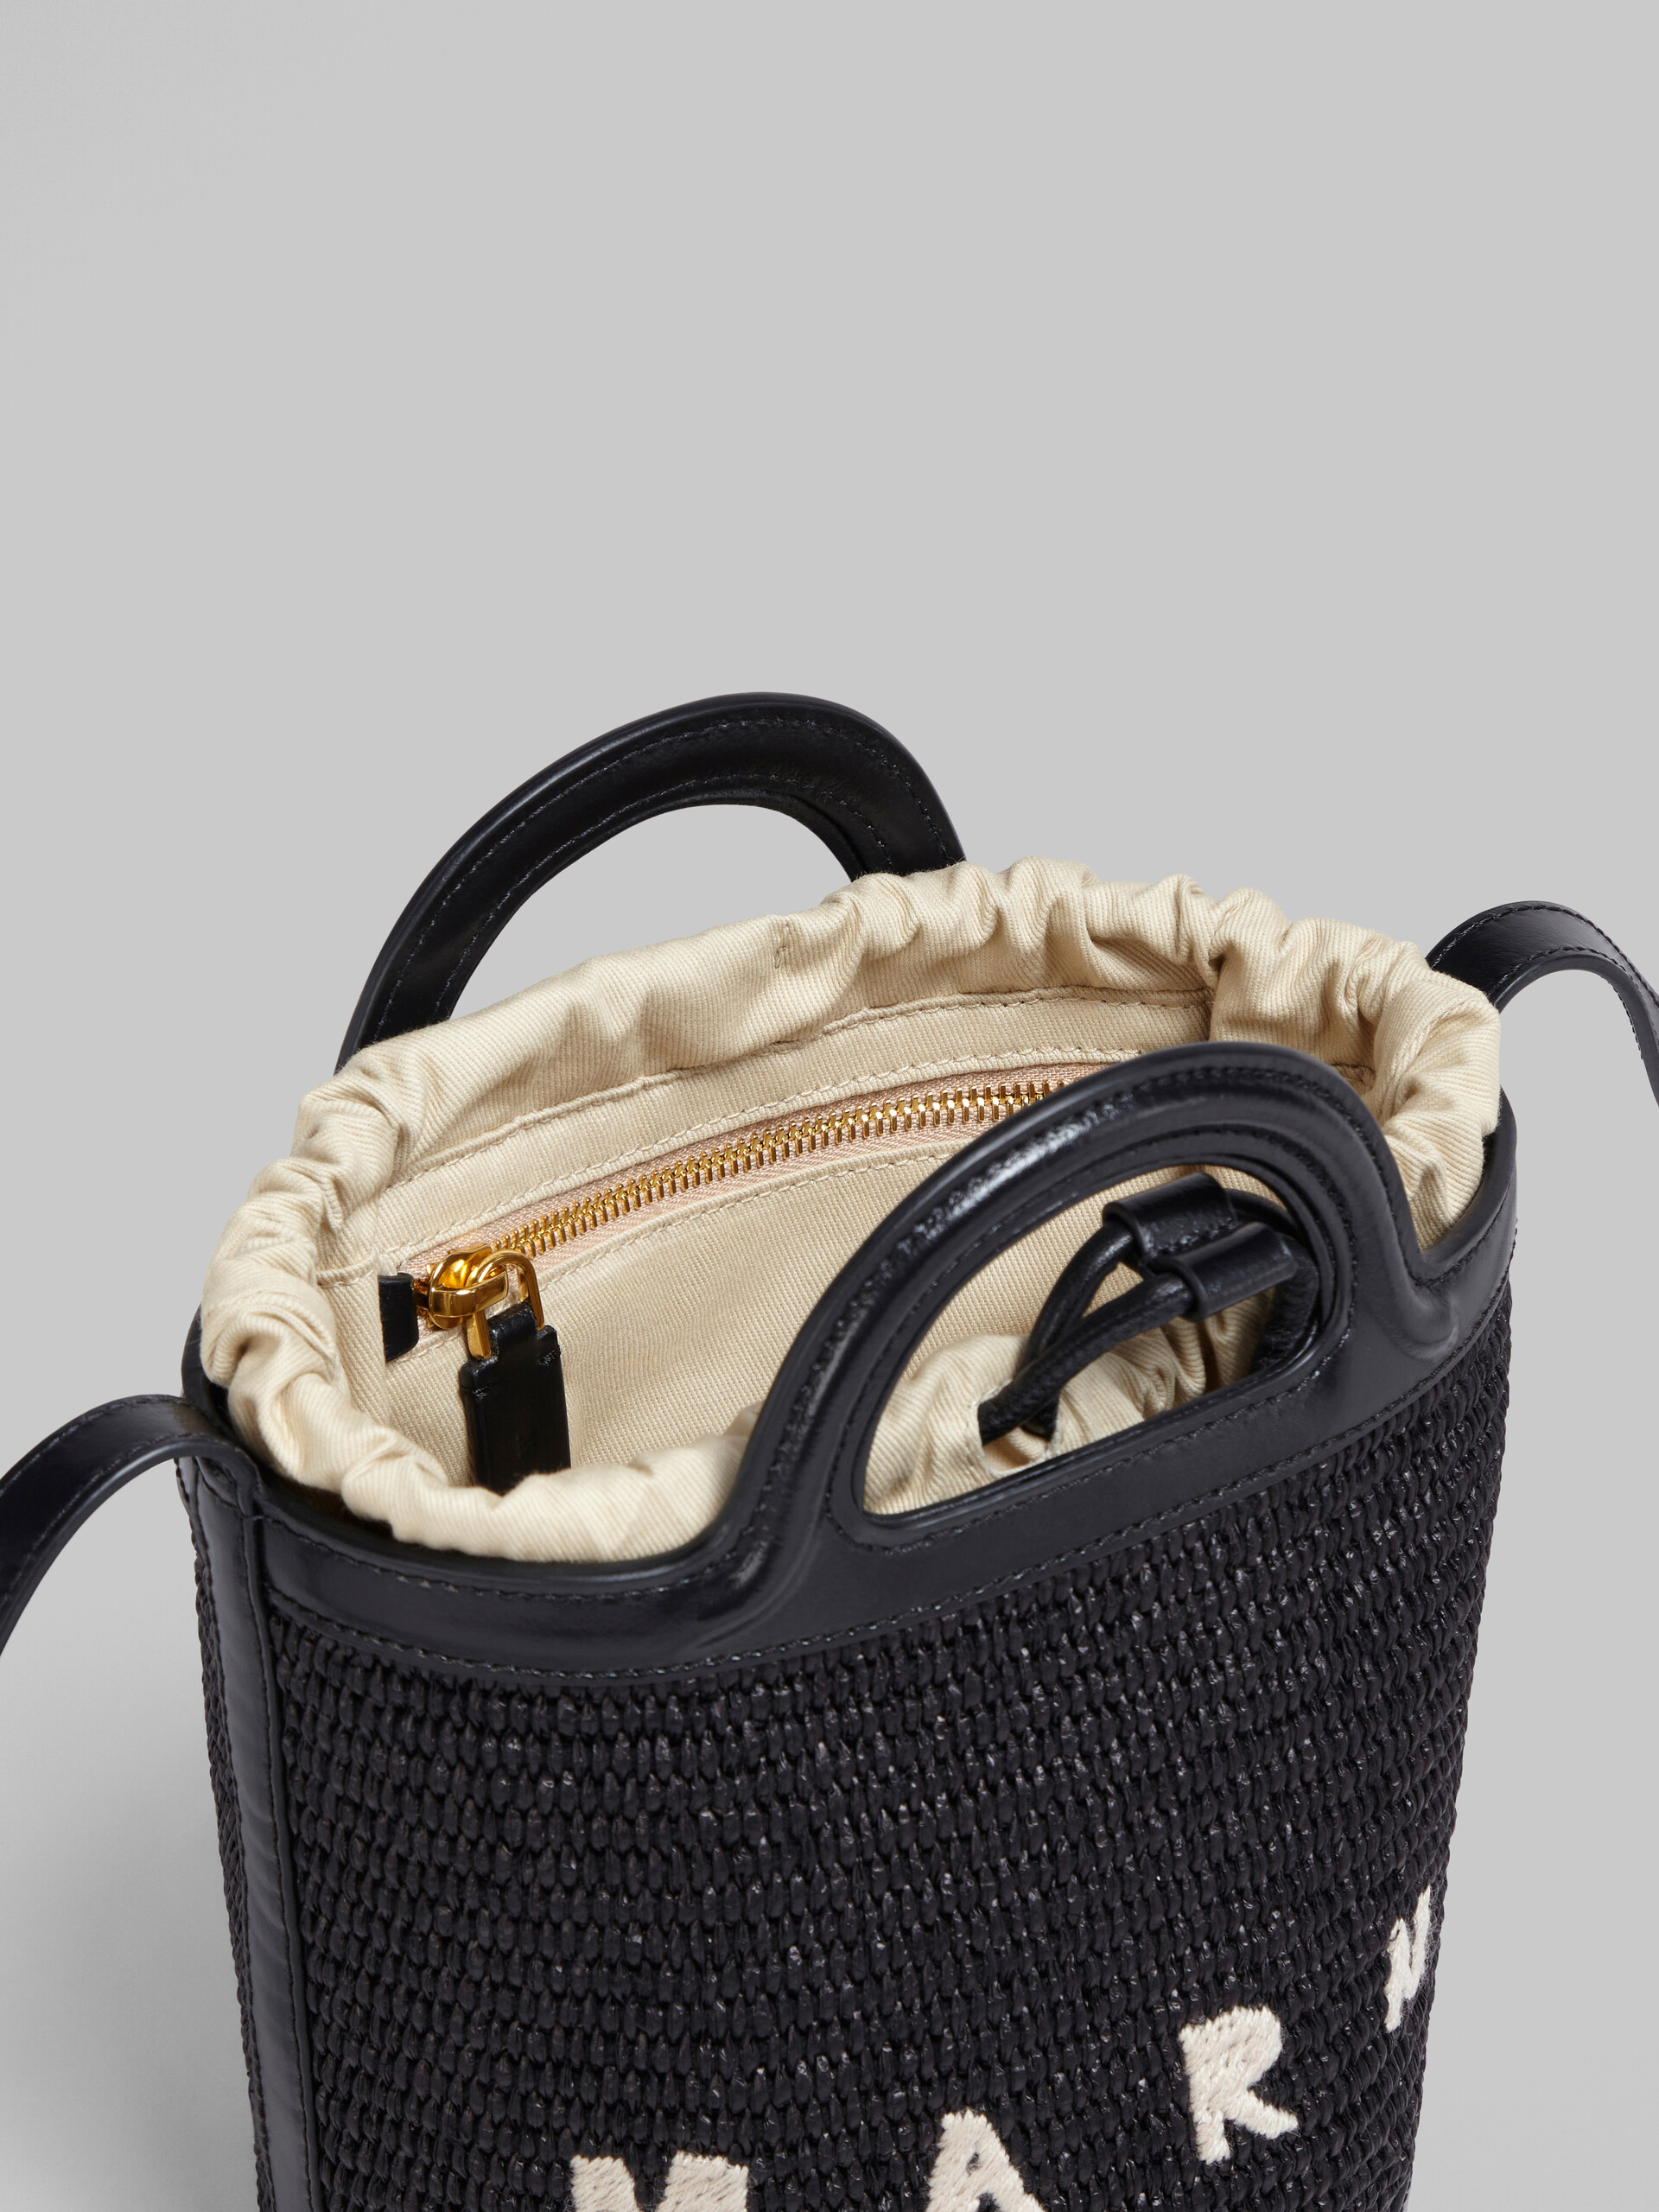 Tropicalia Small Bucket Bag in black leather and raffia - Shoulder Bags - Image 3